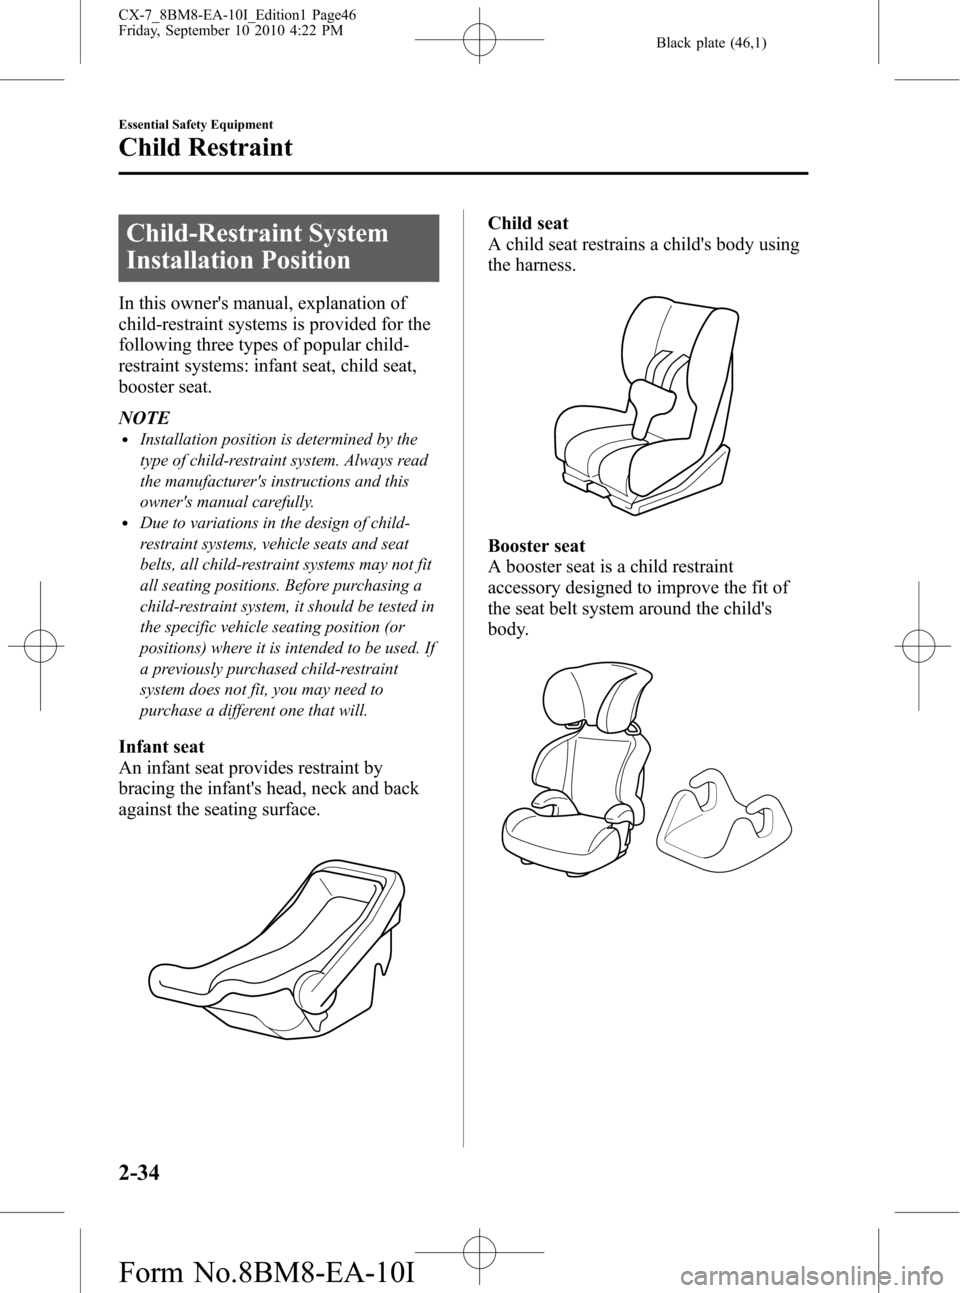 MAZDA MODEL CX-7 2011   (in English) Service Manual Black plate (46,1)
Child-Restraint System
Installation Position
In this owners manual, explanation of
child-restraint systems is provided for the
following three types of popular child-
restraint sys